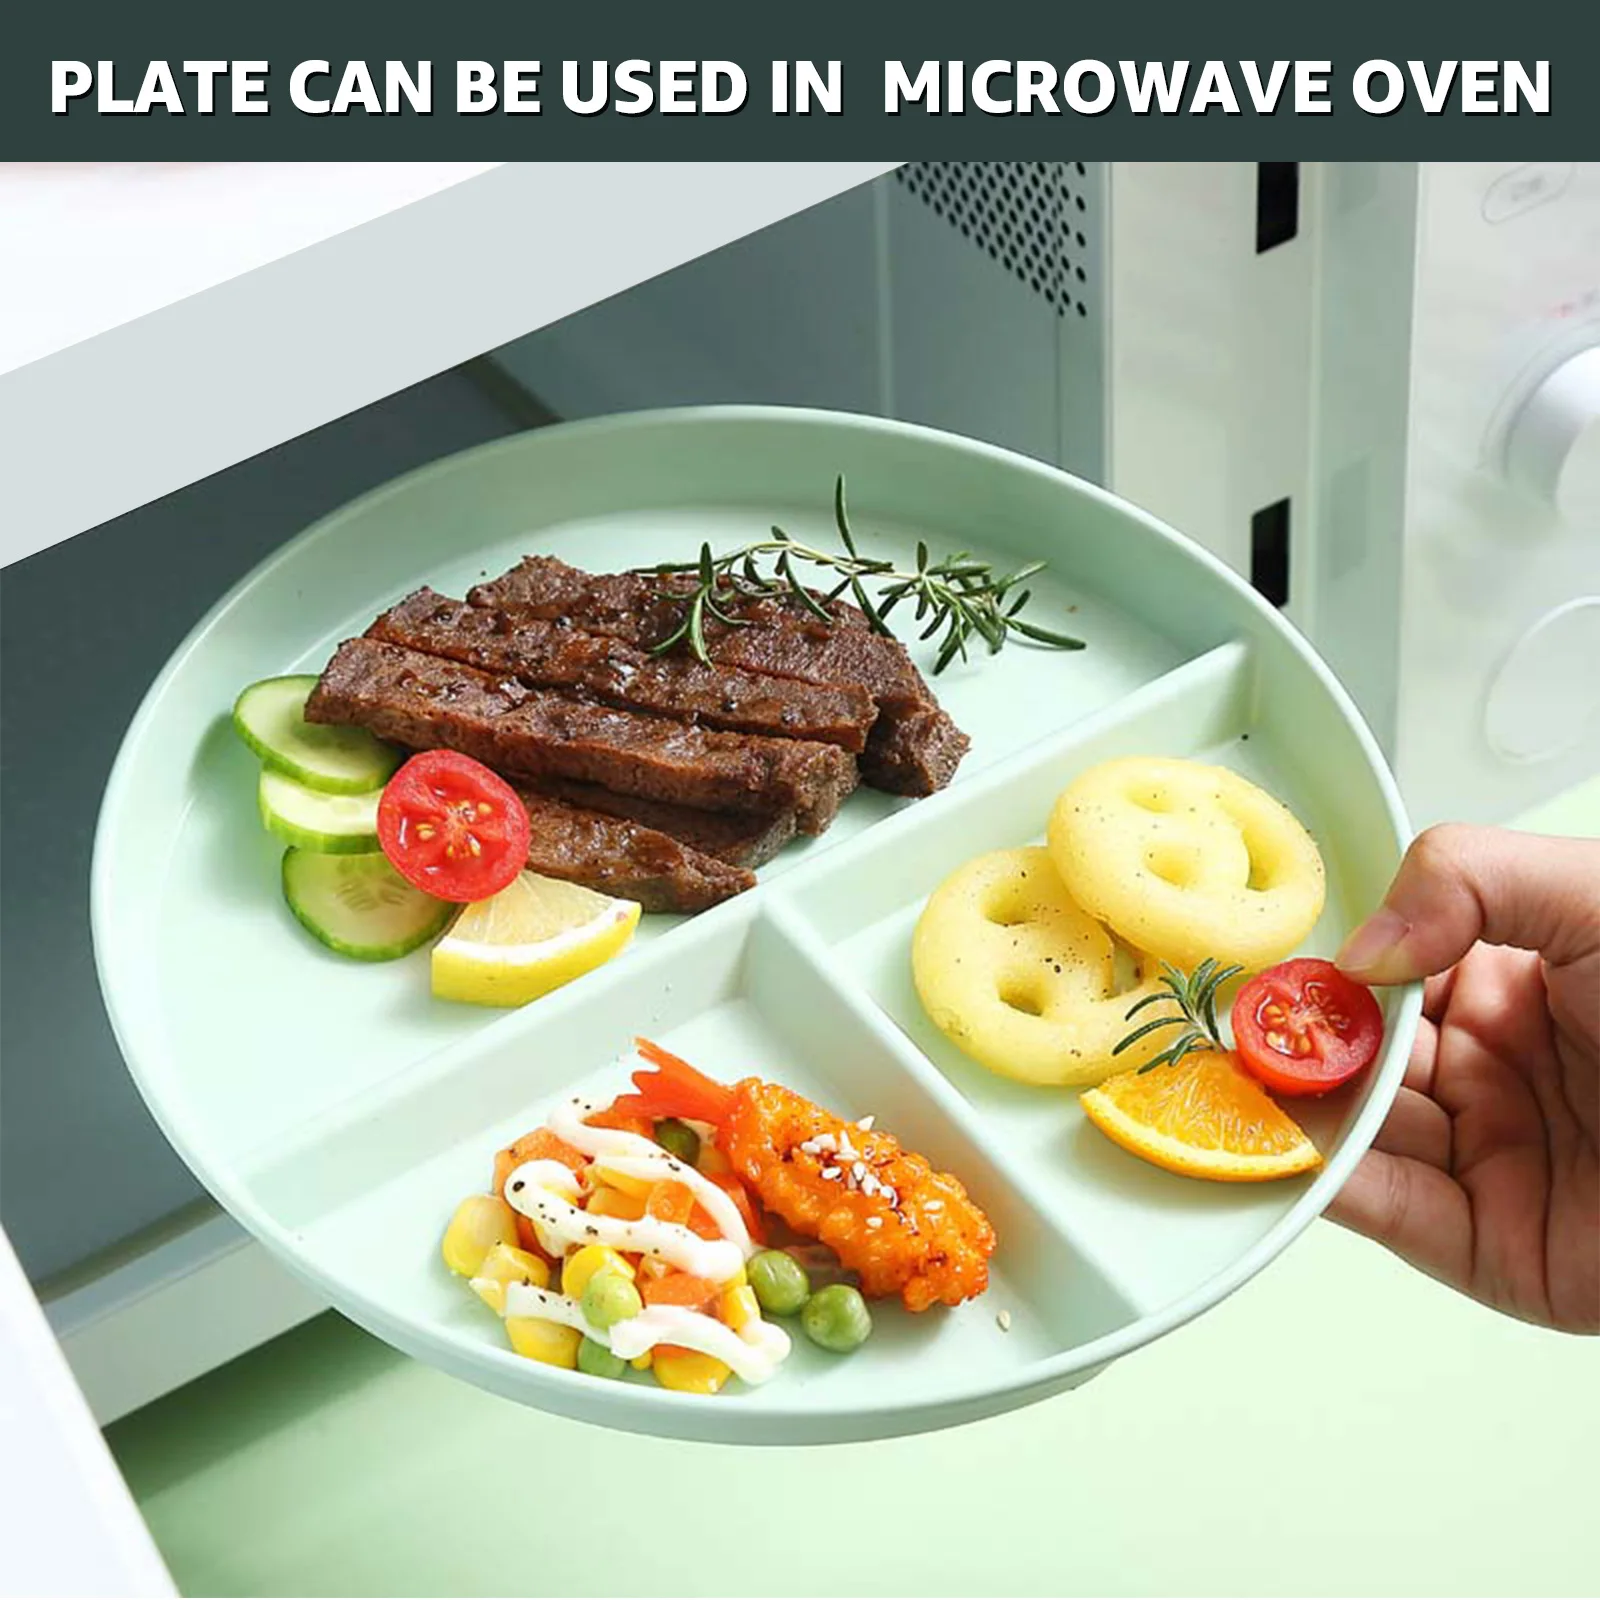 1pcs Food Dinner Plates Reusable, Unbreakable Plastic Dinner Plates,  Lightweight Camping Plates, Various Colors Microwave Plates, Kitchen Plates  Dishwasher Safe. White